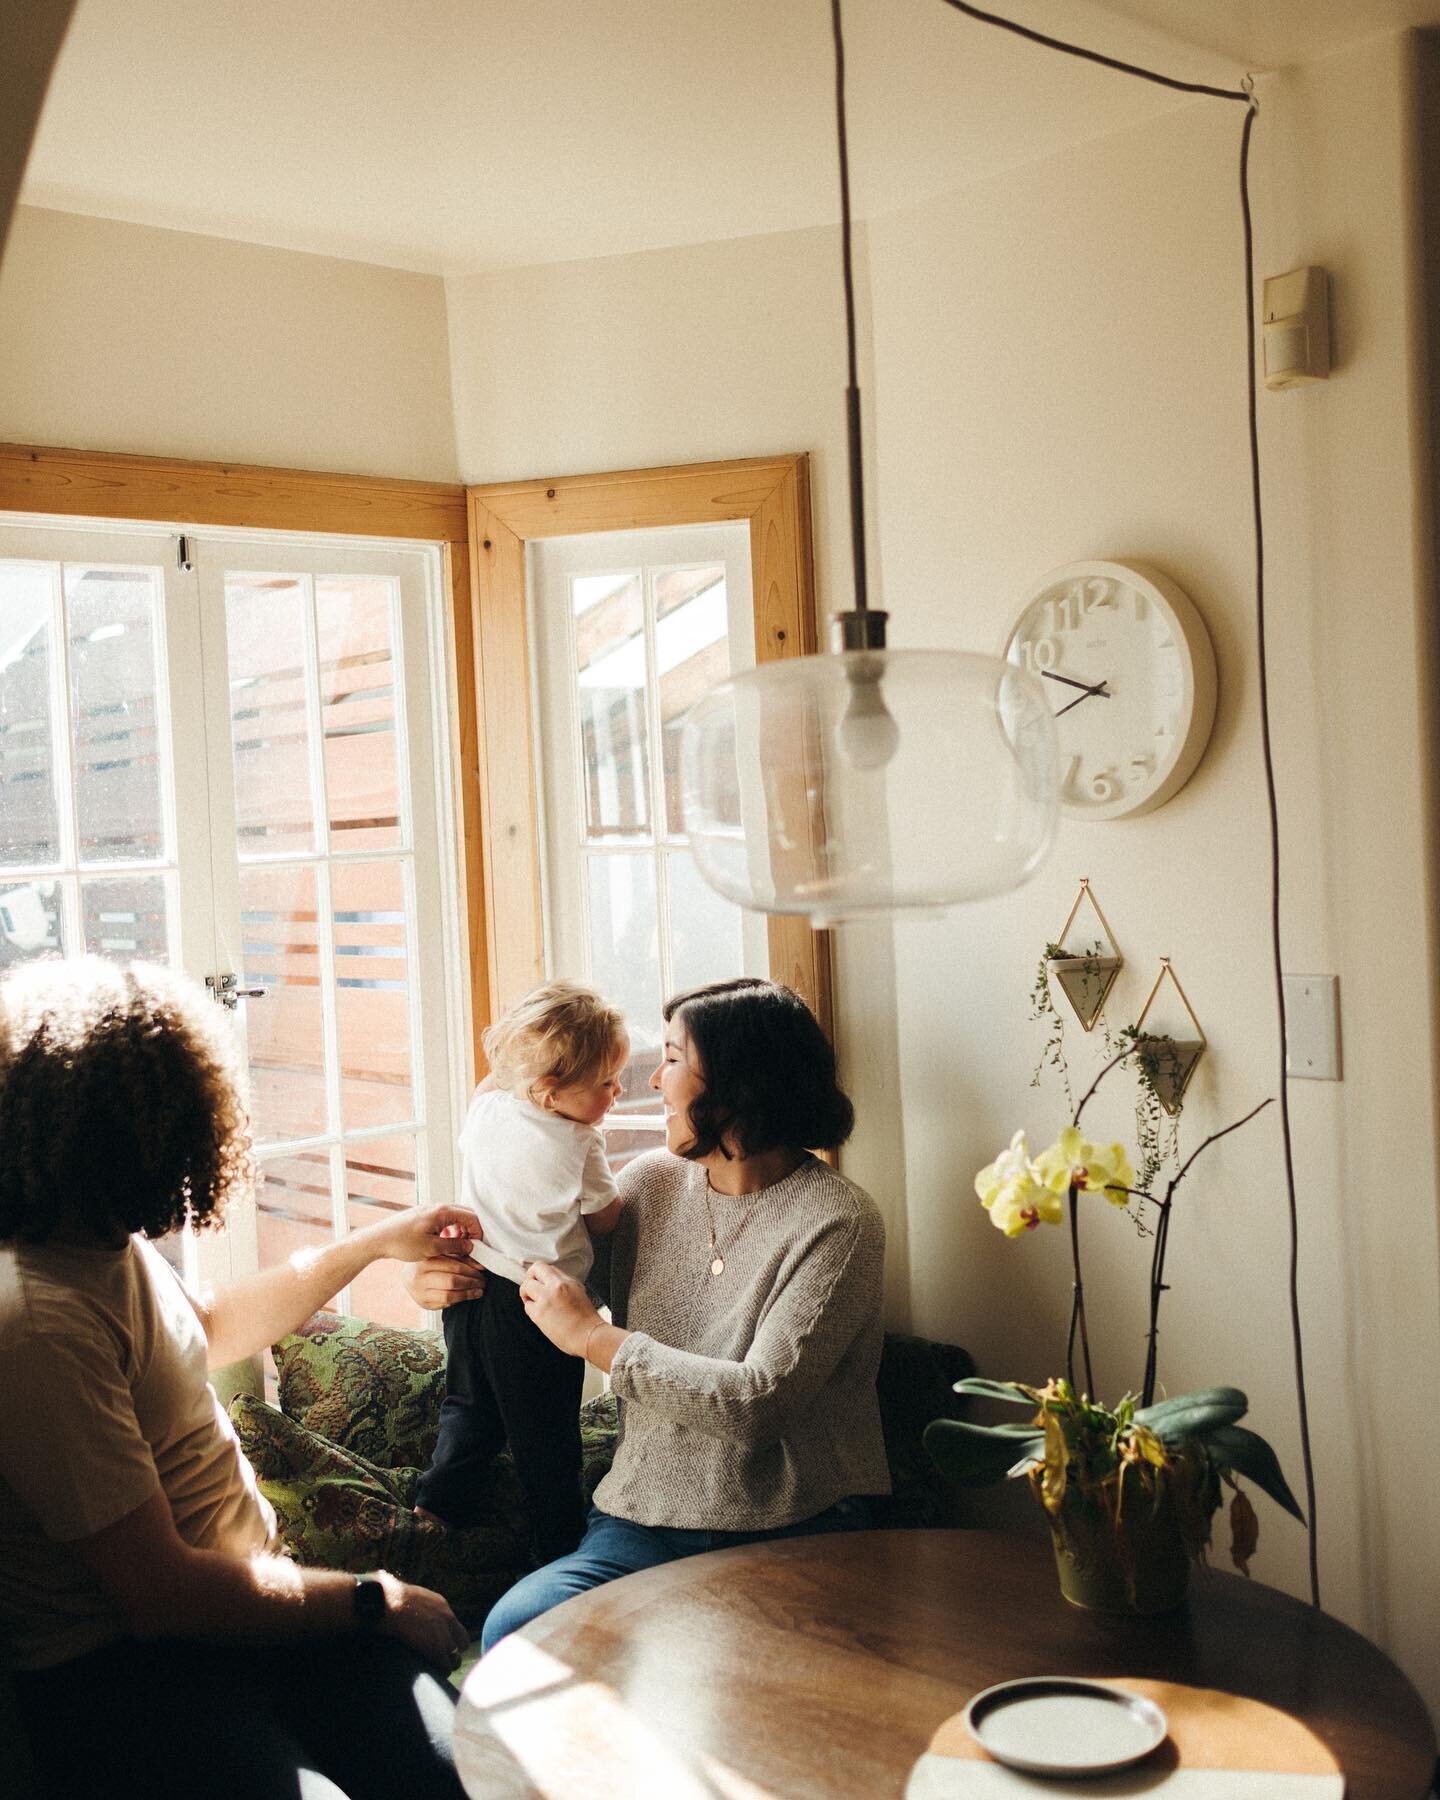 A cozy family moment in a sunlit room, featuring two adults and a child near a wooden table, with touches of greenery and a modern lamp hanging above.